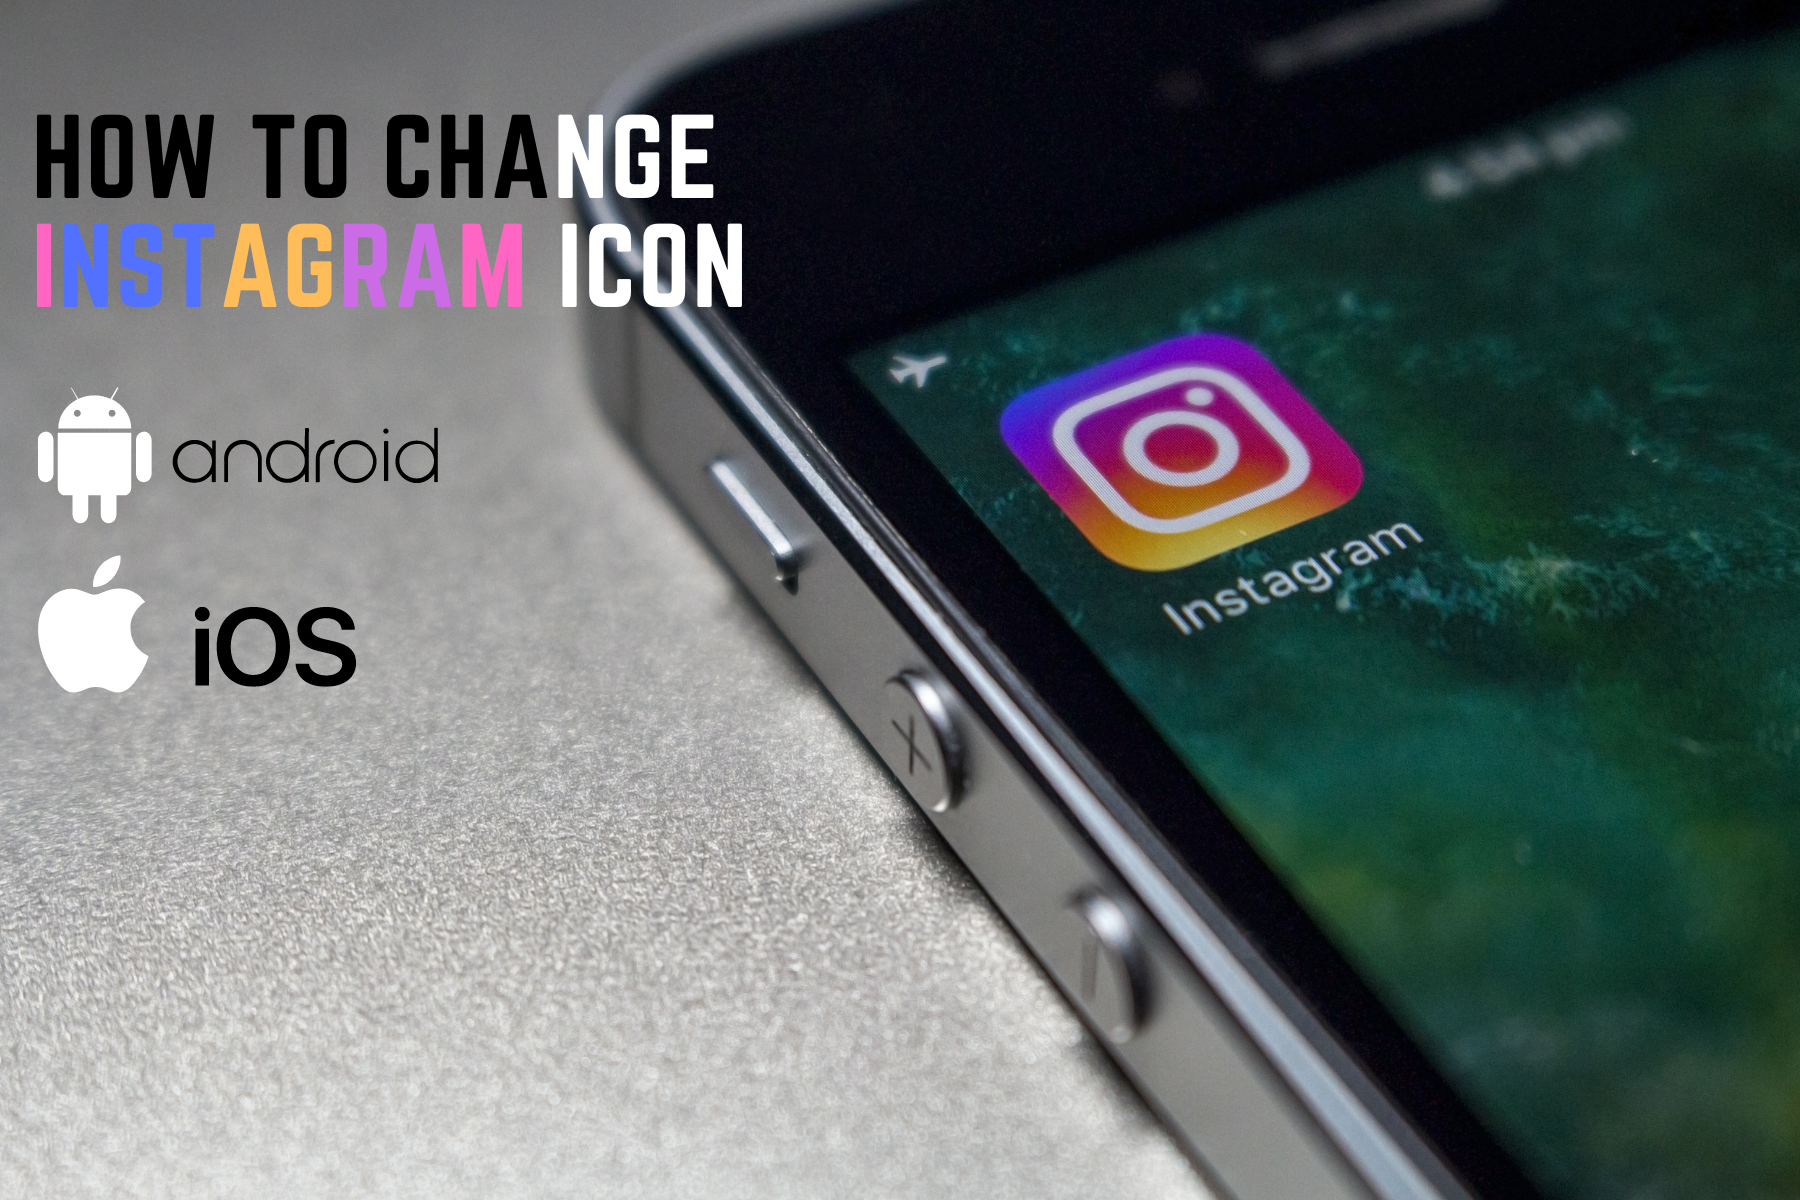 How To Change Instagram Icon - For Android And IOS Users